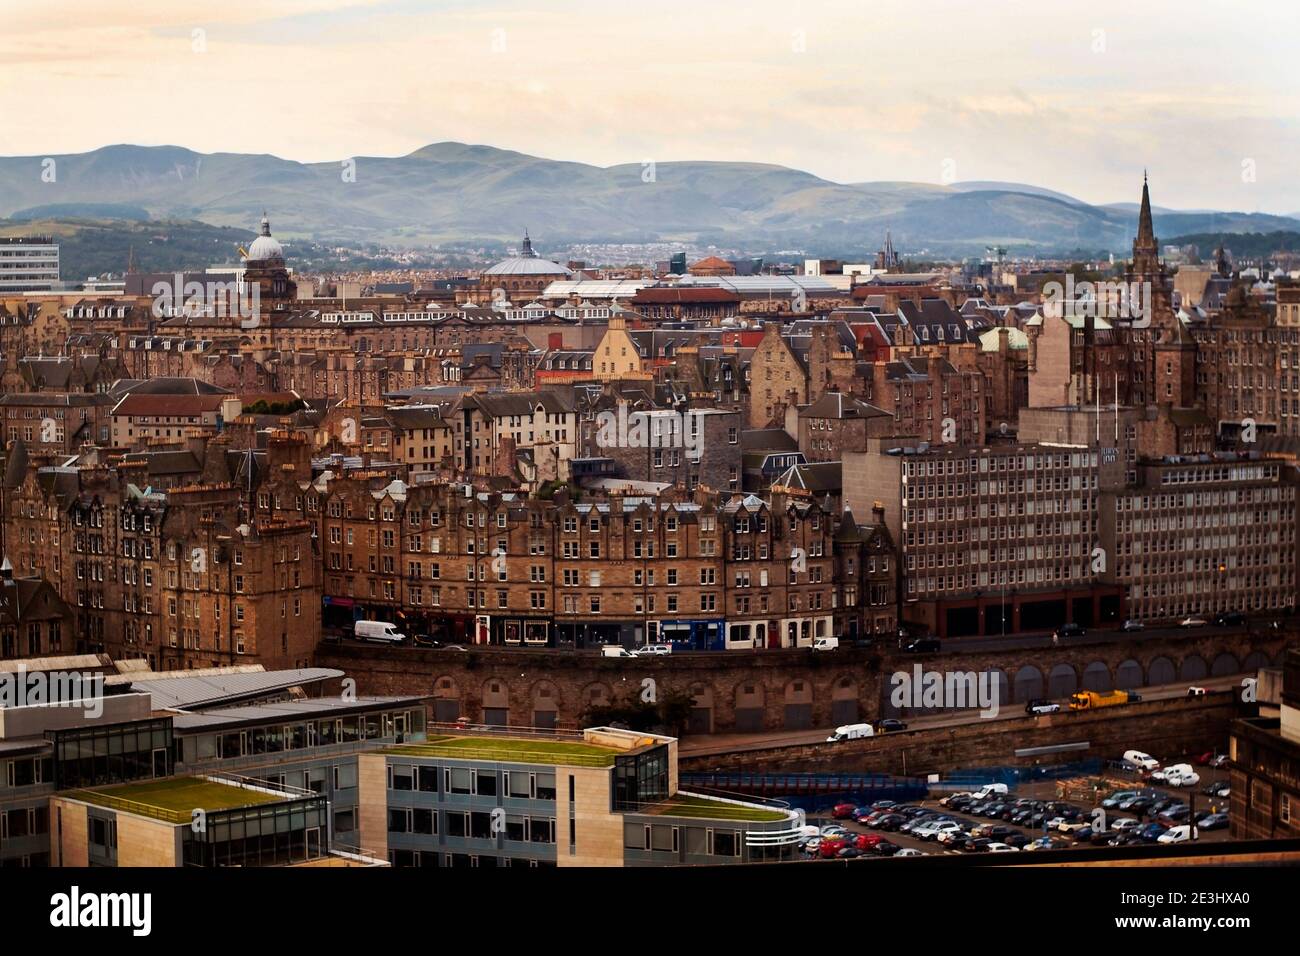 Aerial panorama of old Edinburgh town houses surrounded by hills Stock Photo